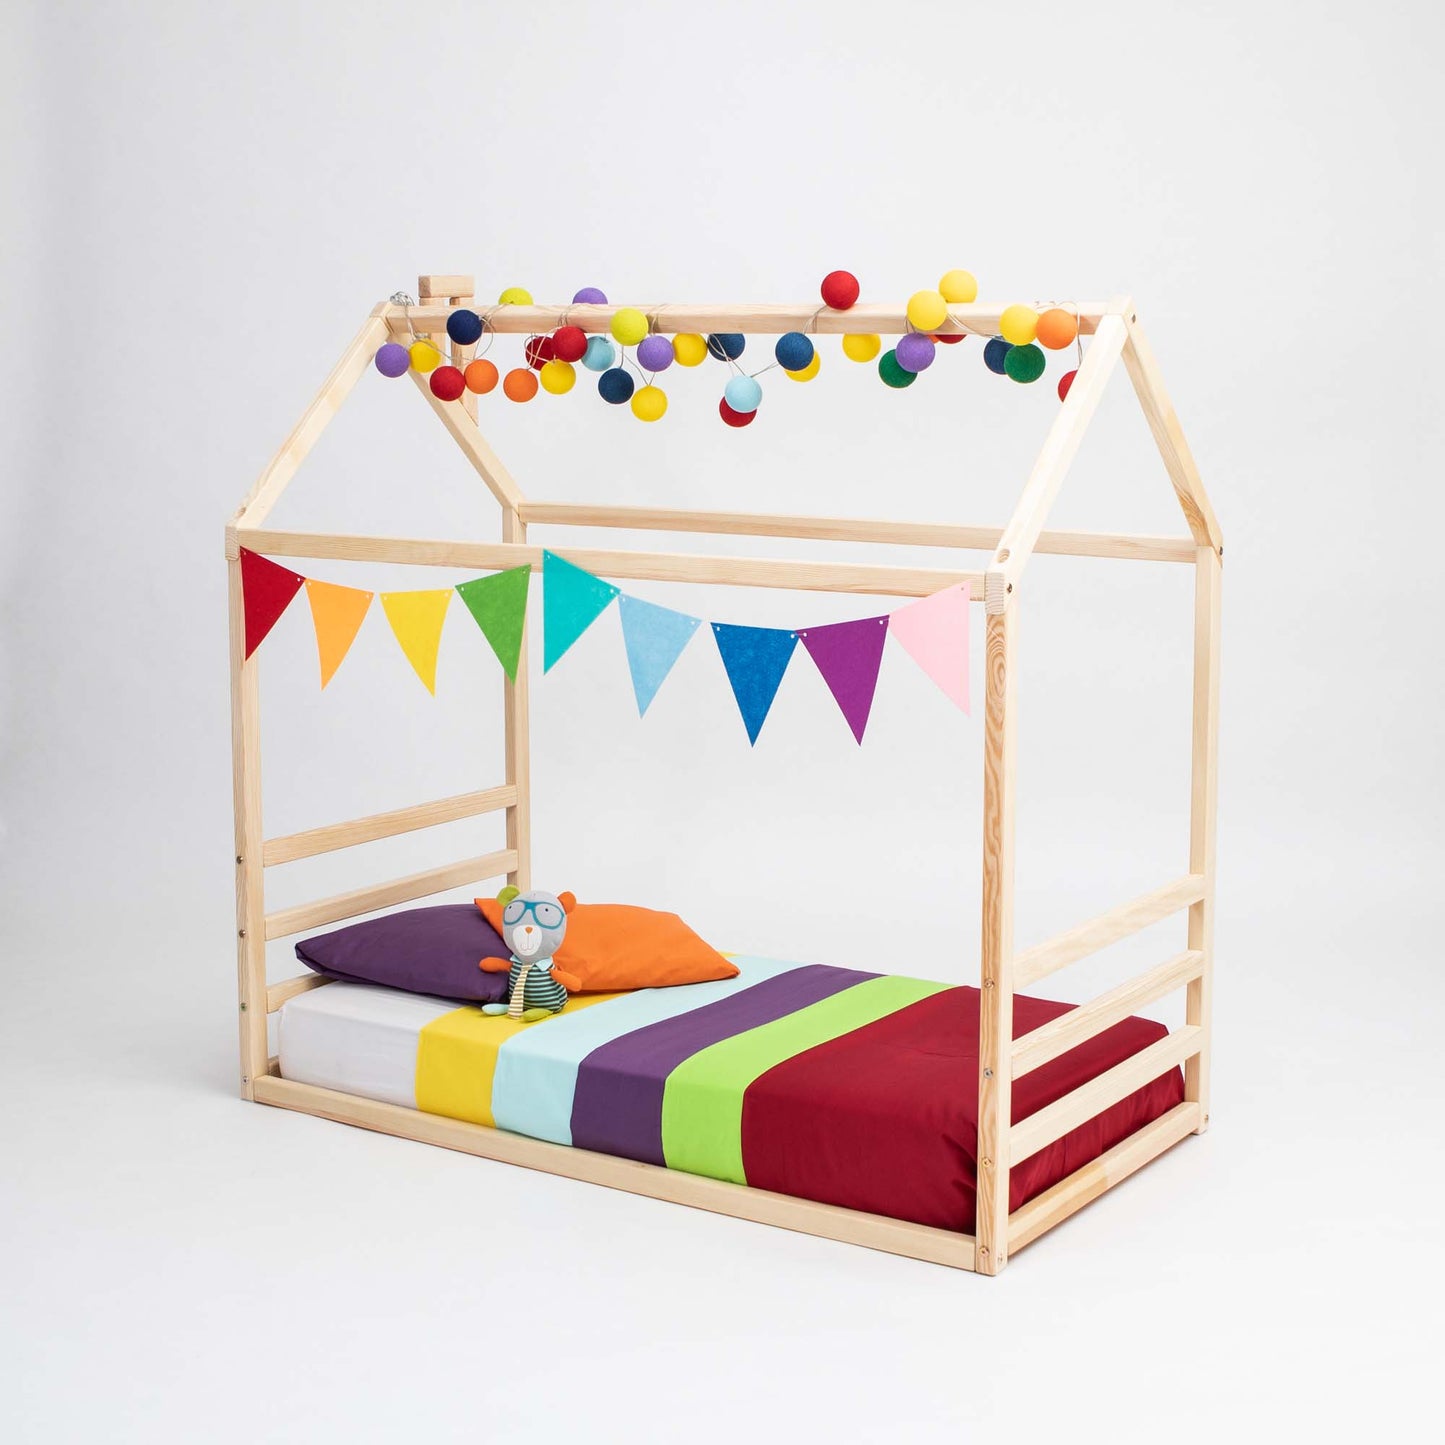 A floor house-frame bed with a horizontal headboard and footboard adorned with multicolored felt ball garland and triangular flags. The bed has colorful bedding consisting of striped blankets and pillows, and a plush toy sits on top.